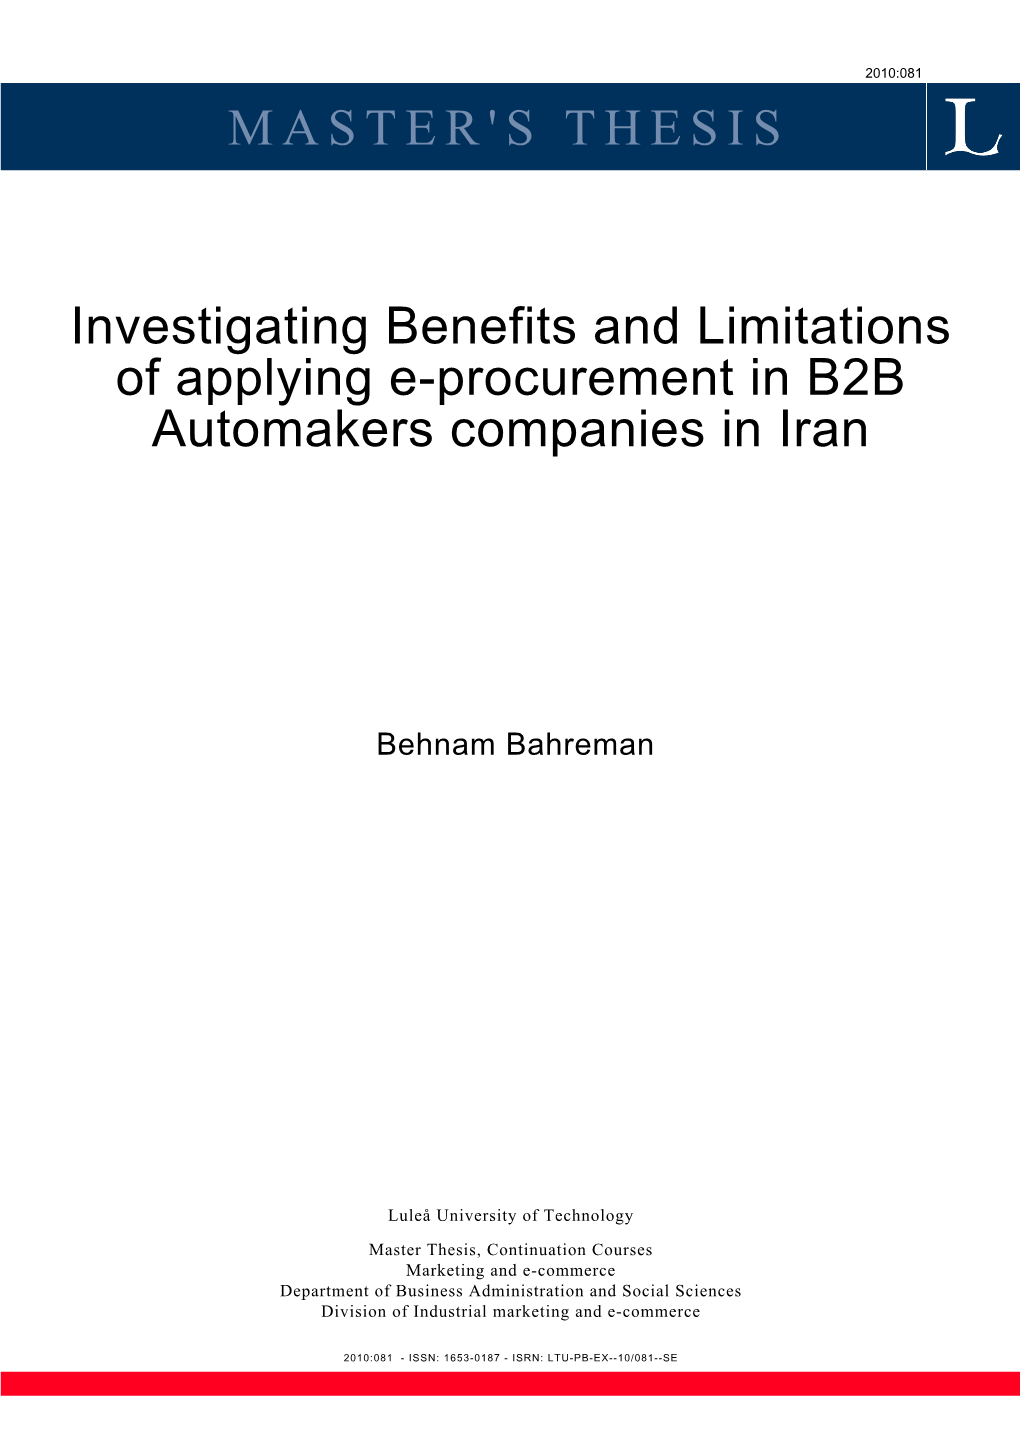 MASTER's THESIS Investigating Benefits and Limitations of Applying E-Procurement in B2B Automakers Companies in Iran